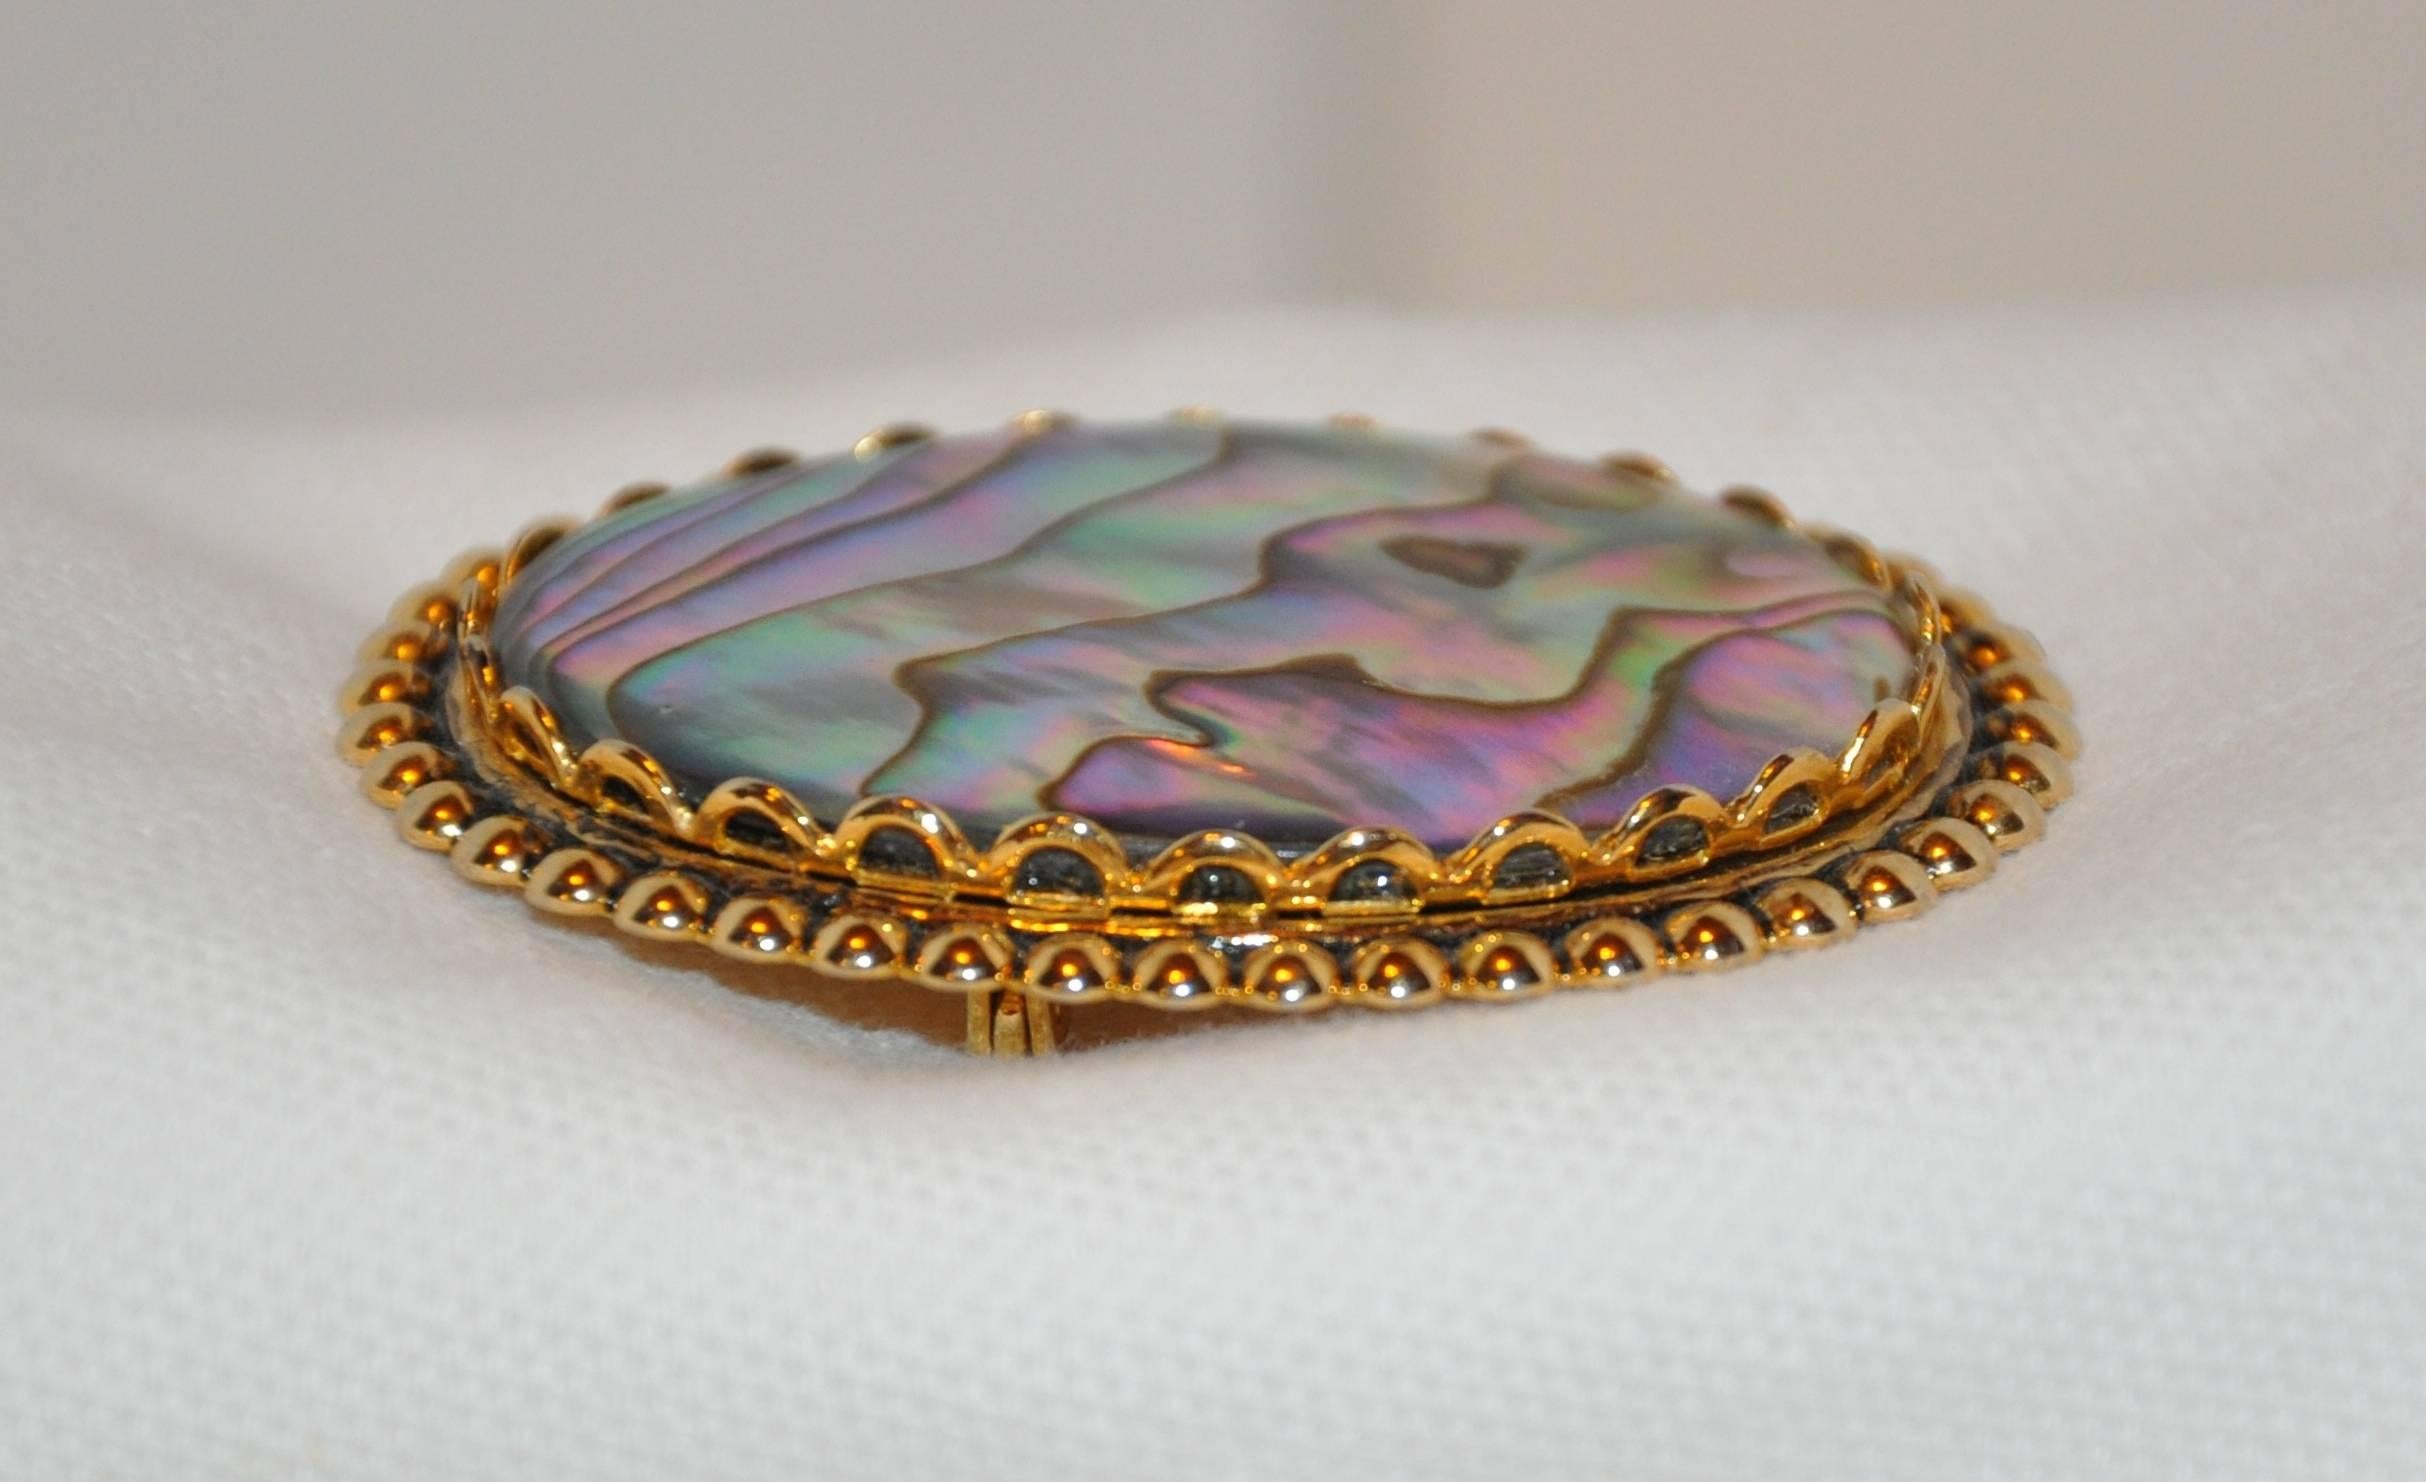      This elegant natural abalone brooch set with gilded gold measures 1 15/16 inches by 1 1/2 inches, made in US.